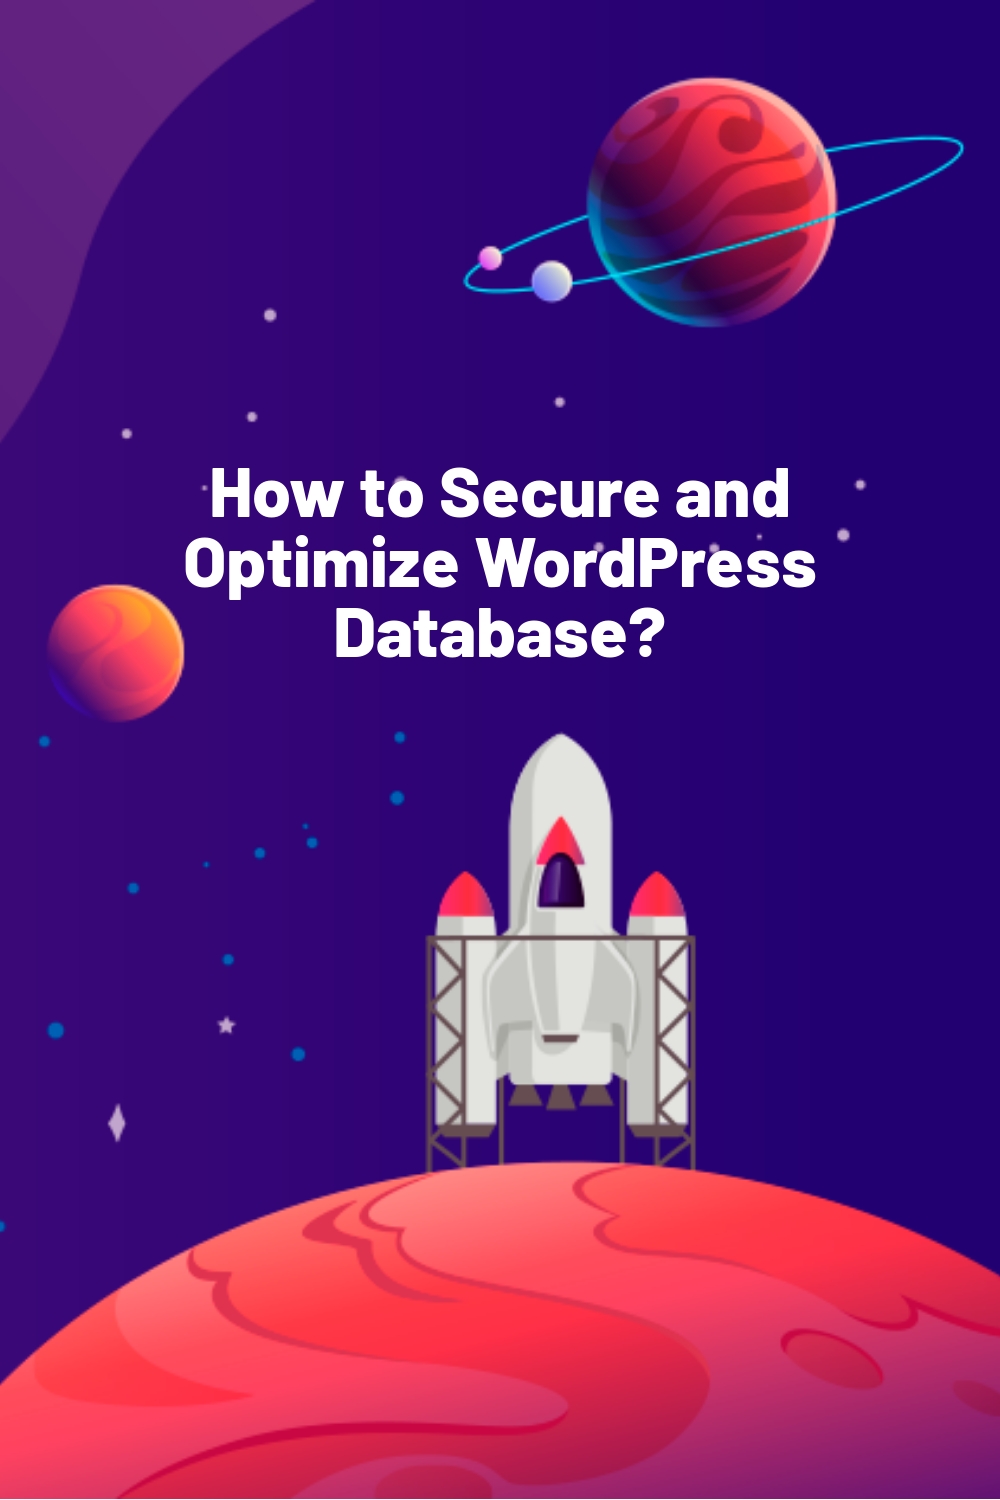 How to Secure and Optimize WordPress Database?